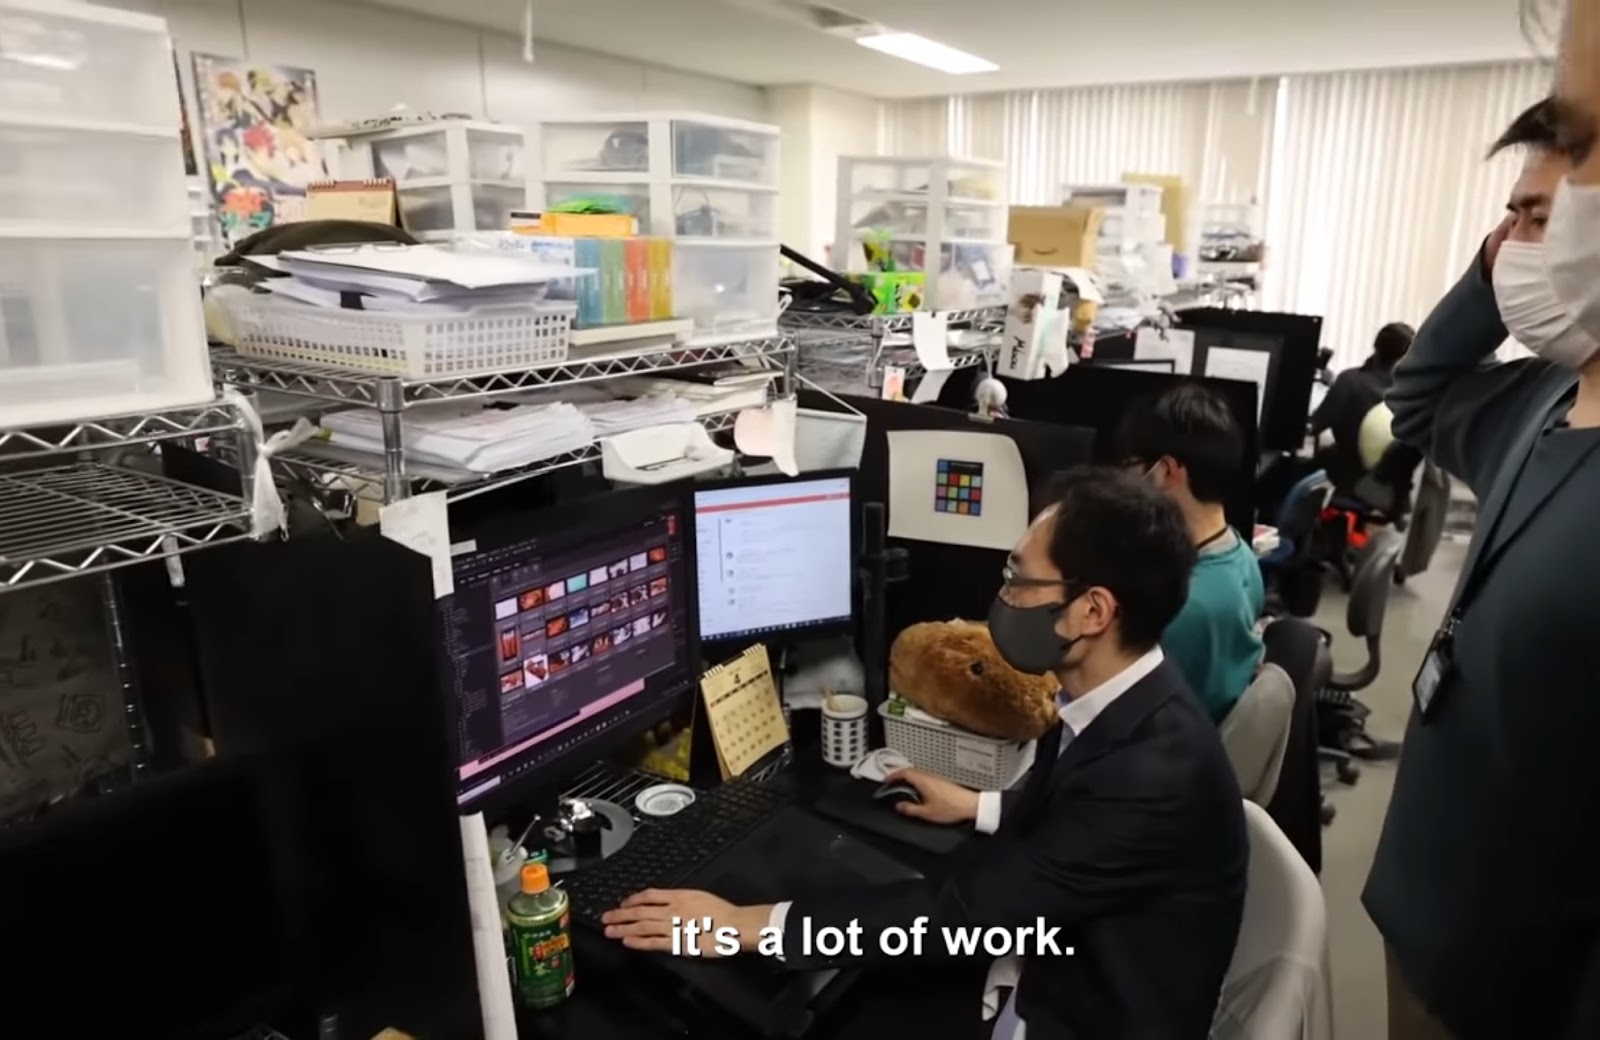 A cluttered animation studio with animators at workstations, and a caption saying "it's a lot of work.